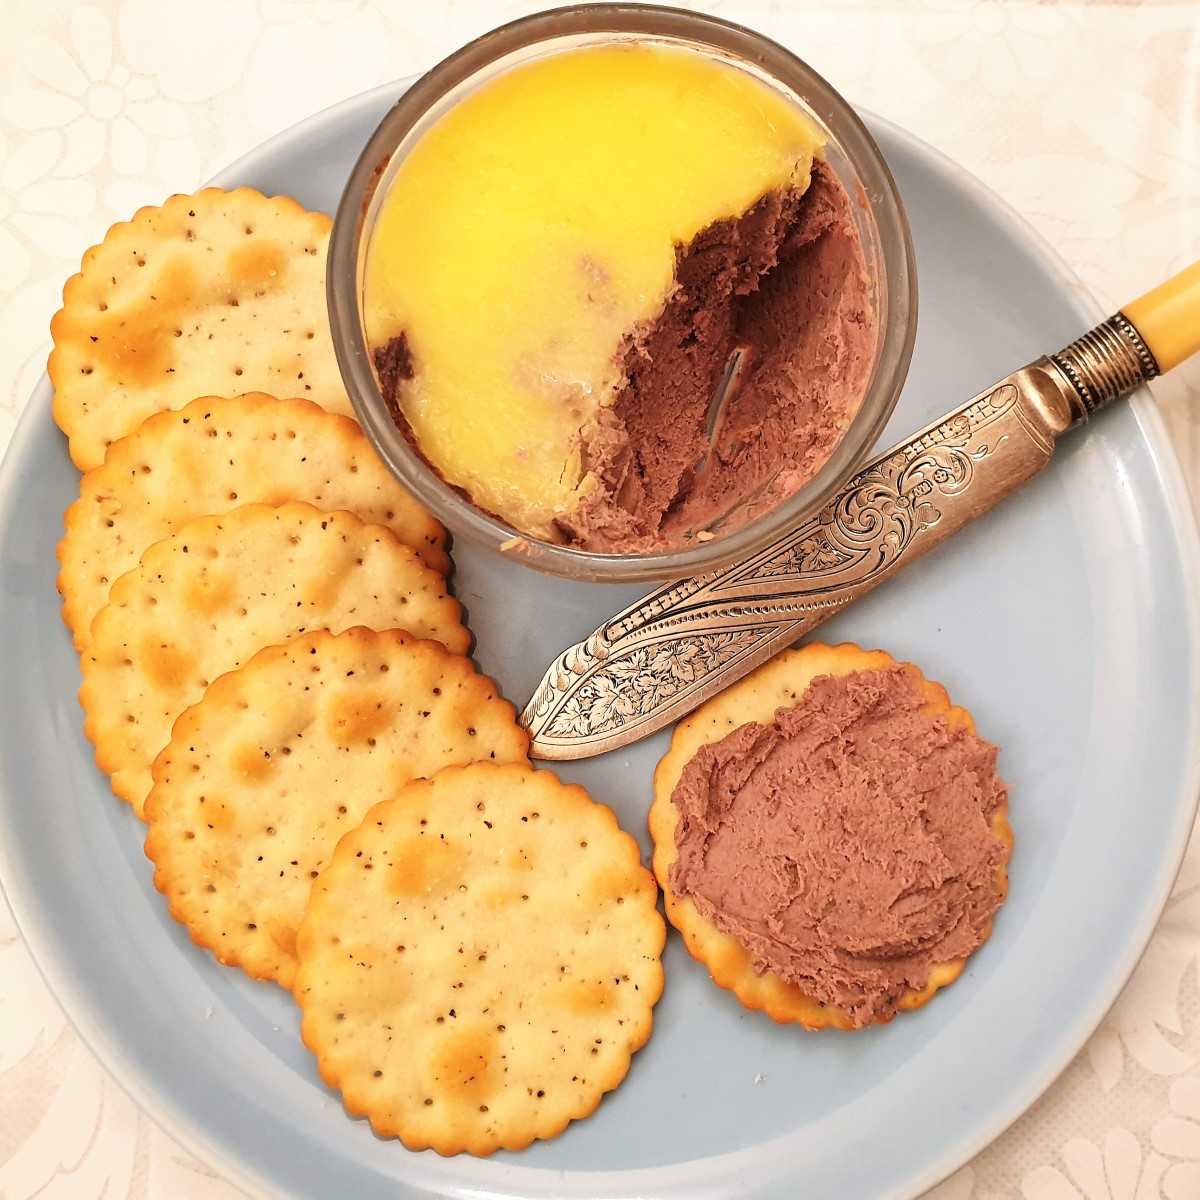 A dish of chicken liver pate on a plate with a biscuit spread with the pate.